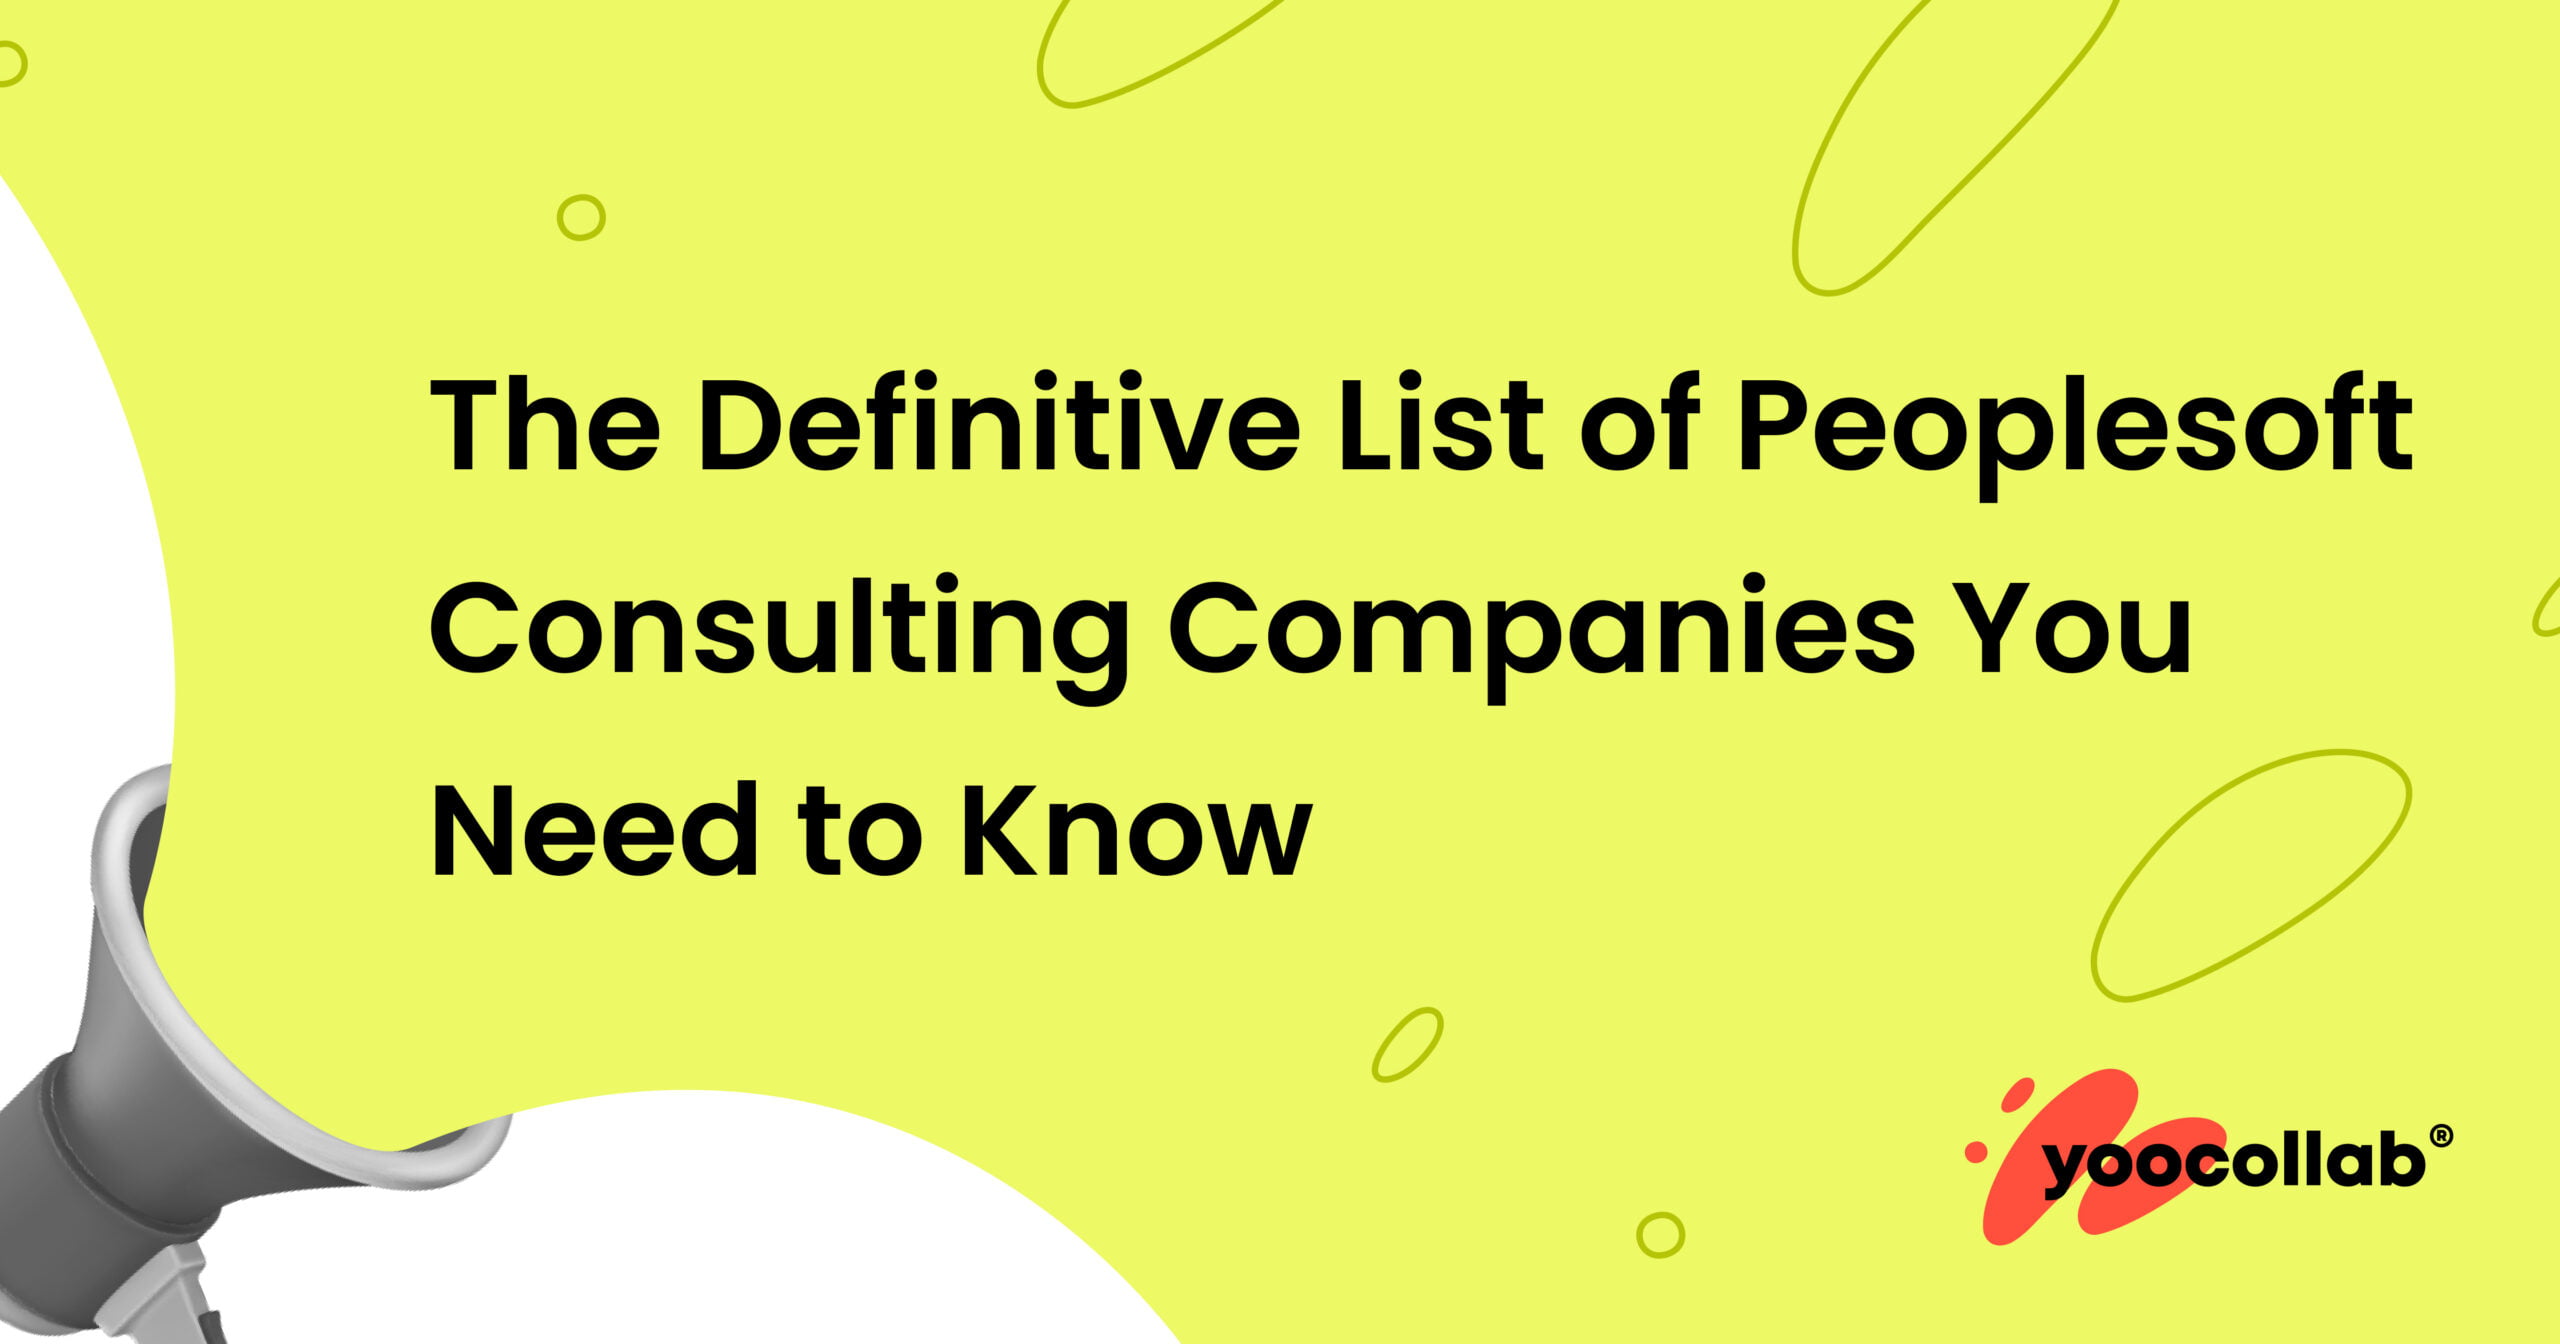 The Definitive List of Peoplesoft Consulting Companies You Need to Know